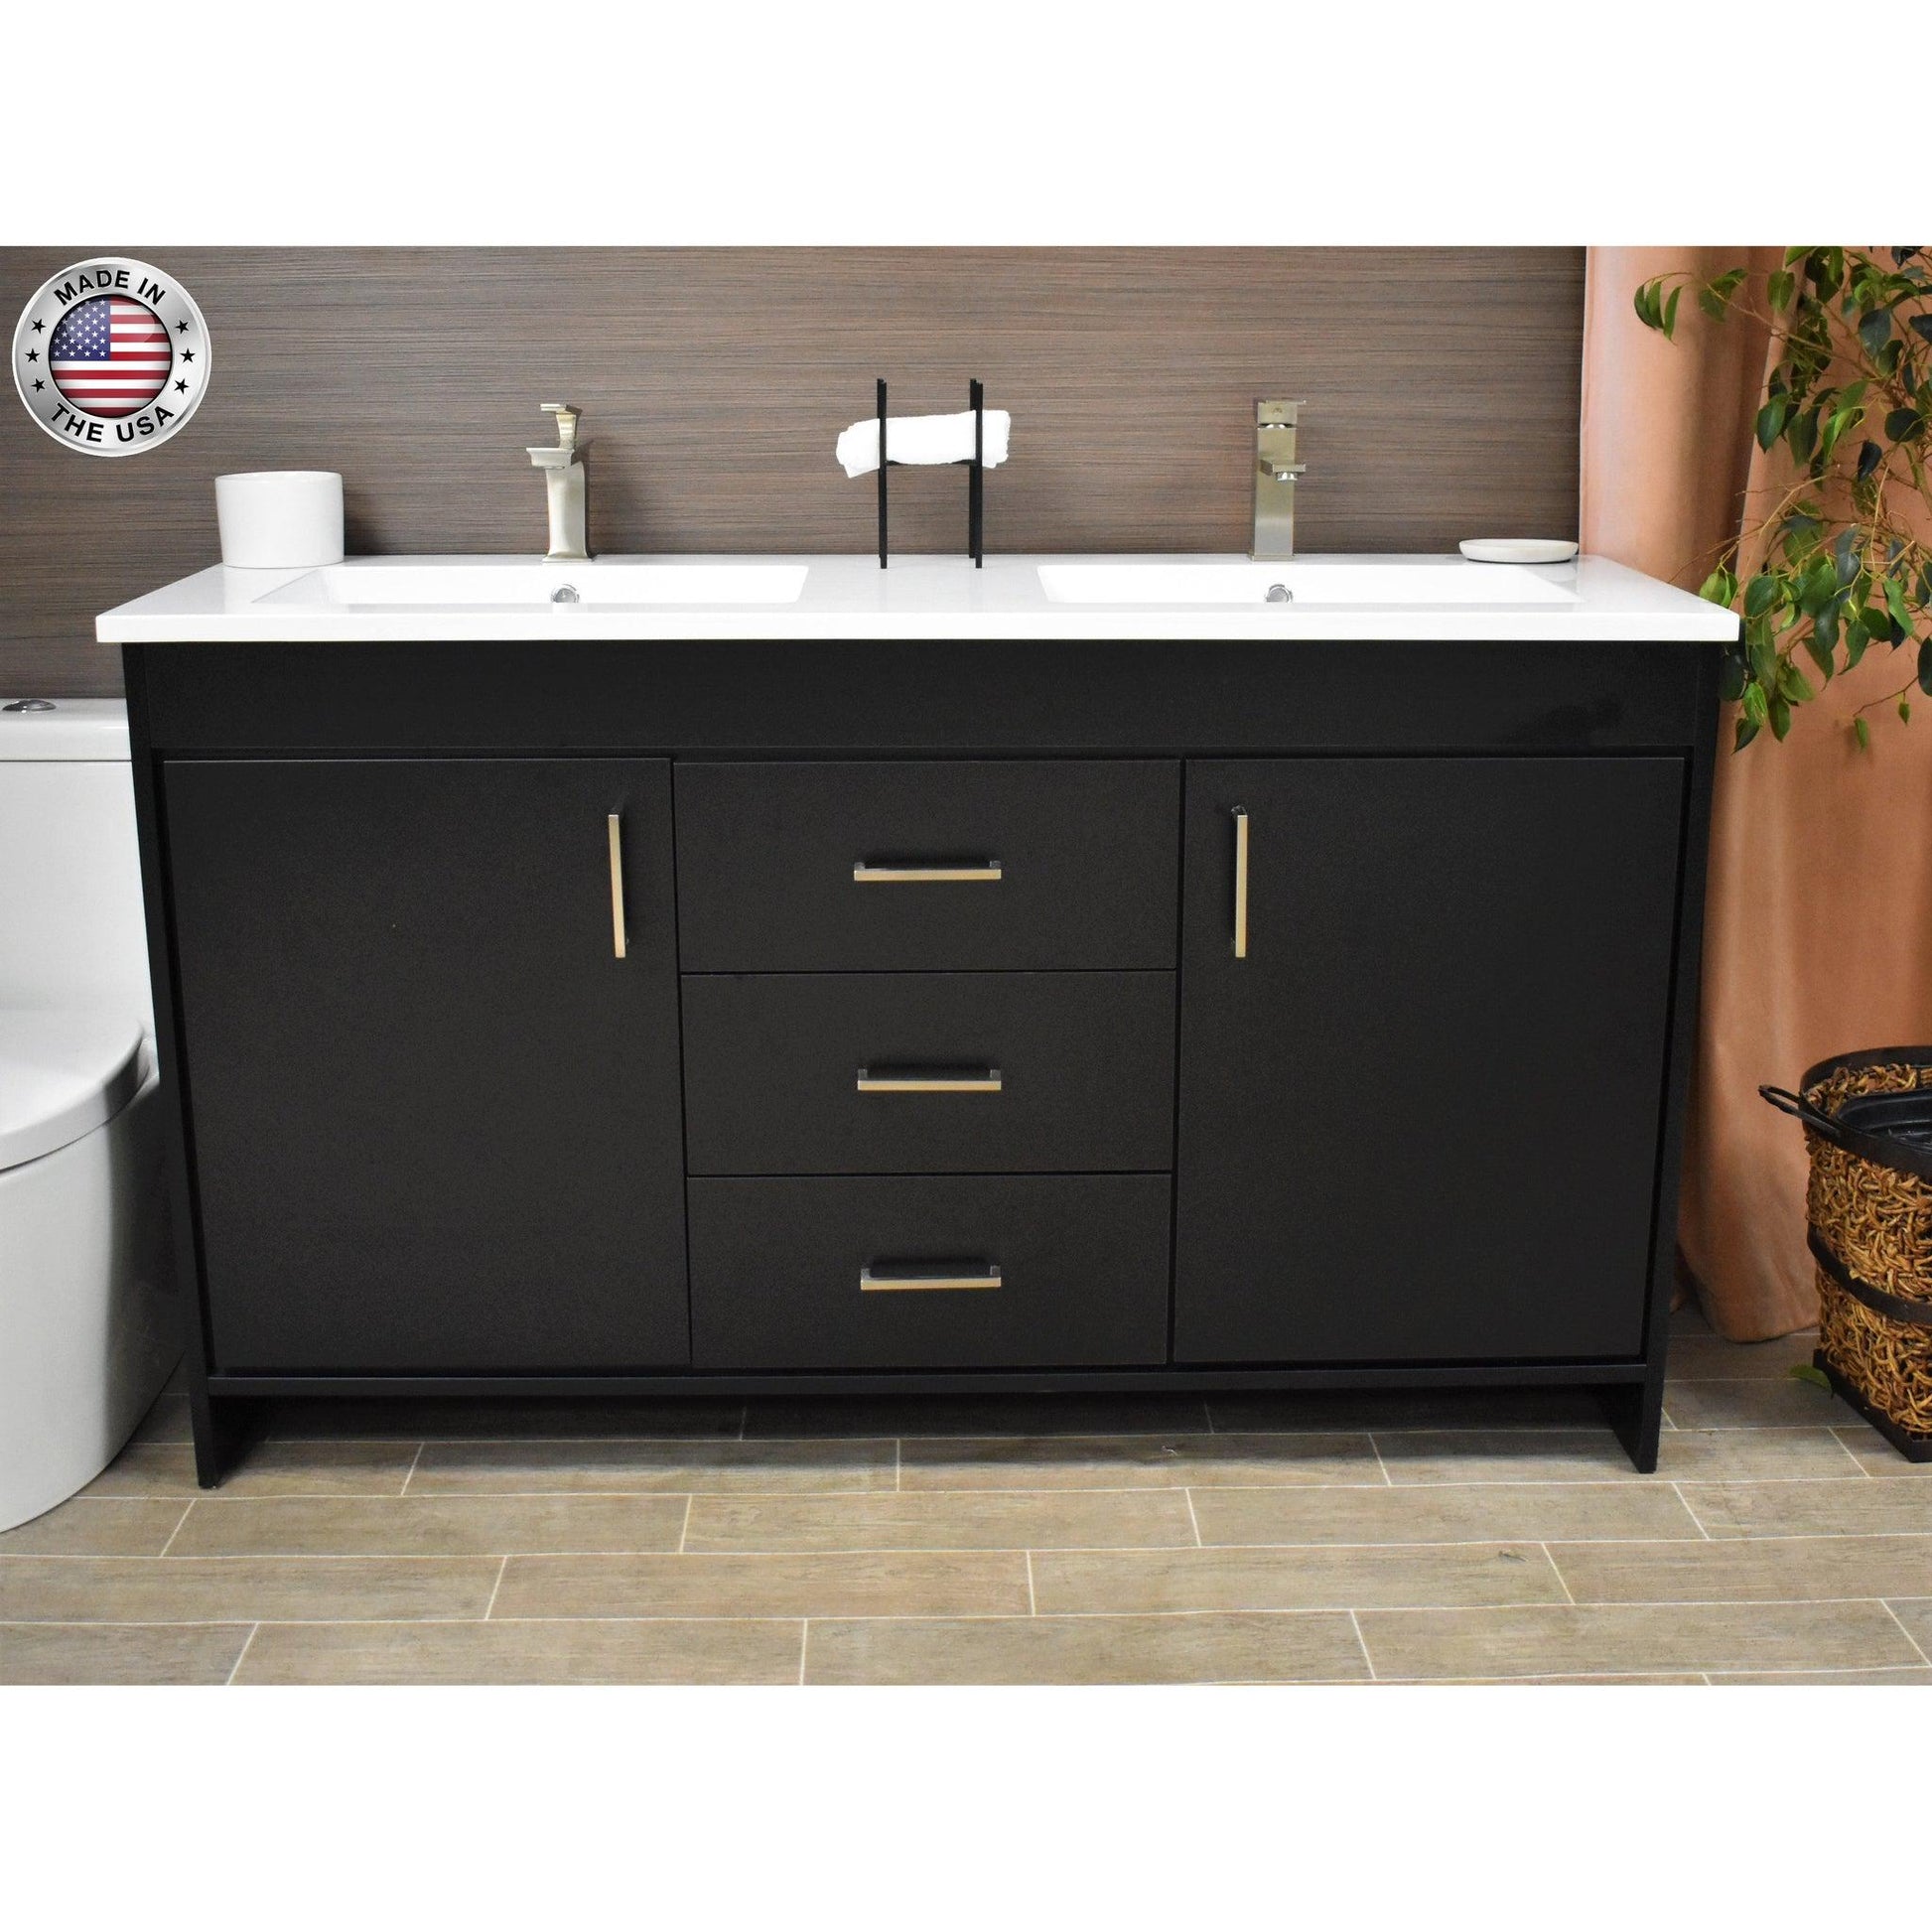 Volpa USA Rio 60" Black Freestanding Modern Bathroom Vanity With Integrated Acrylic Double Sink Top and Brushed Nickel Handles